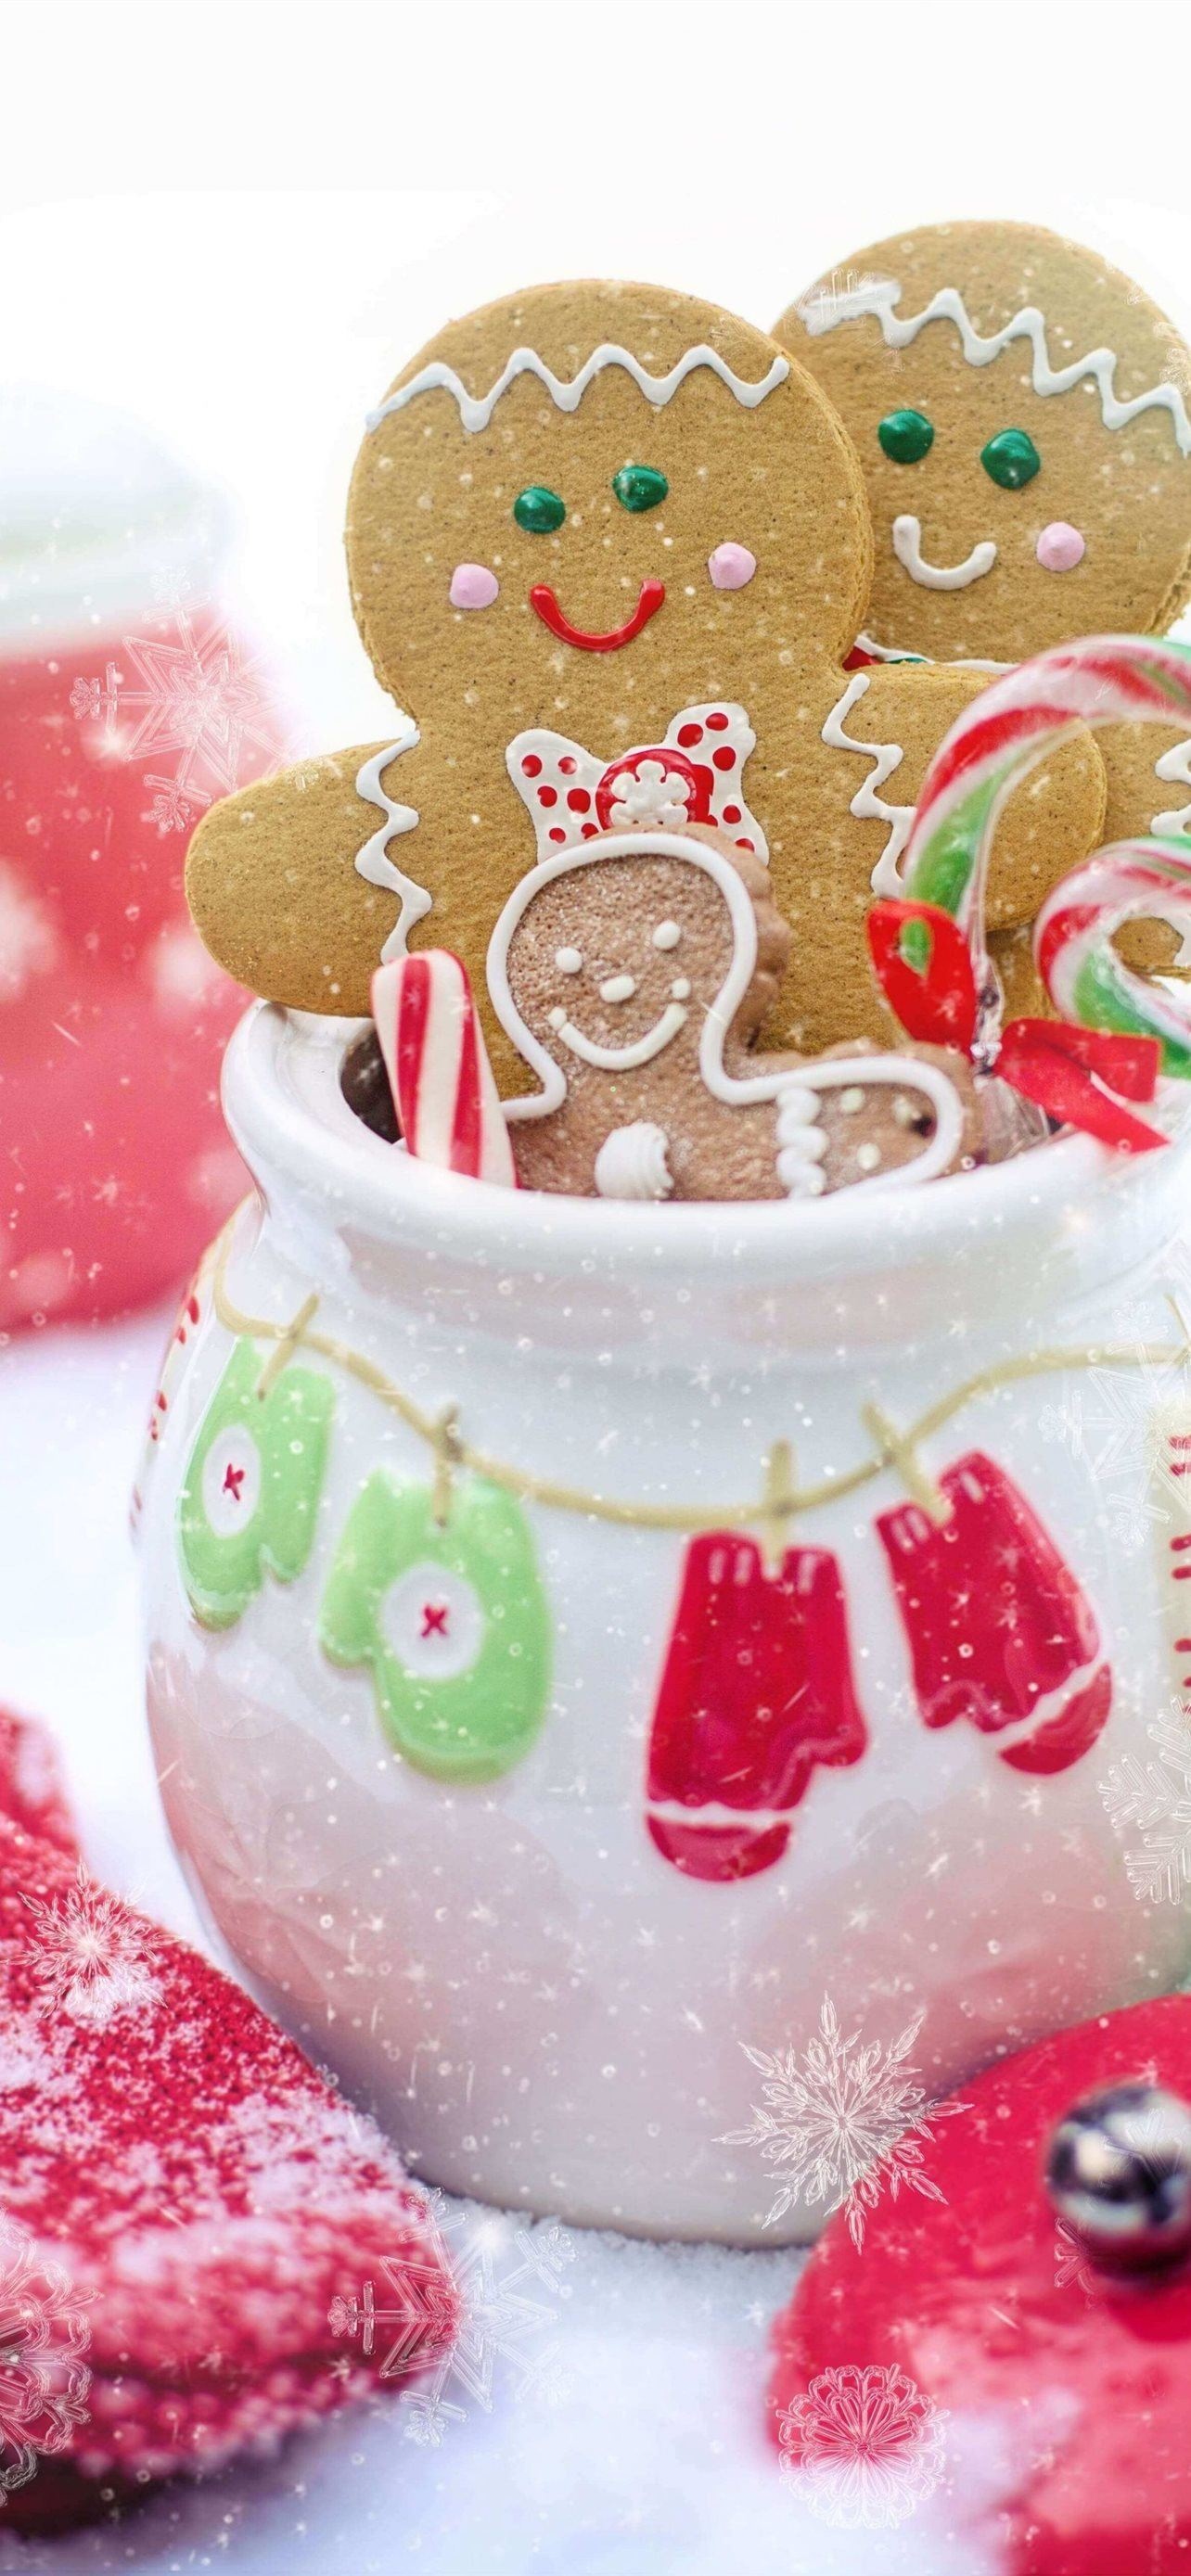 Gingerbread Man, Holiday wallpapers, Christmas-themed backgrounds, Festive phone screens, 1290x2780 HD Handy